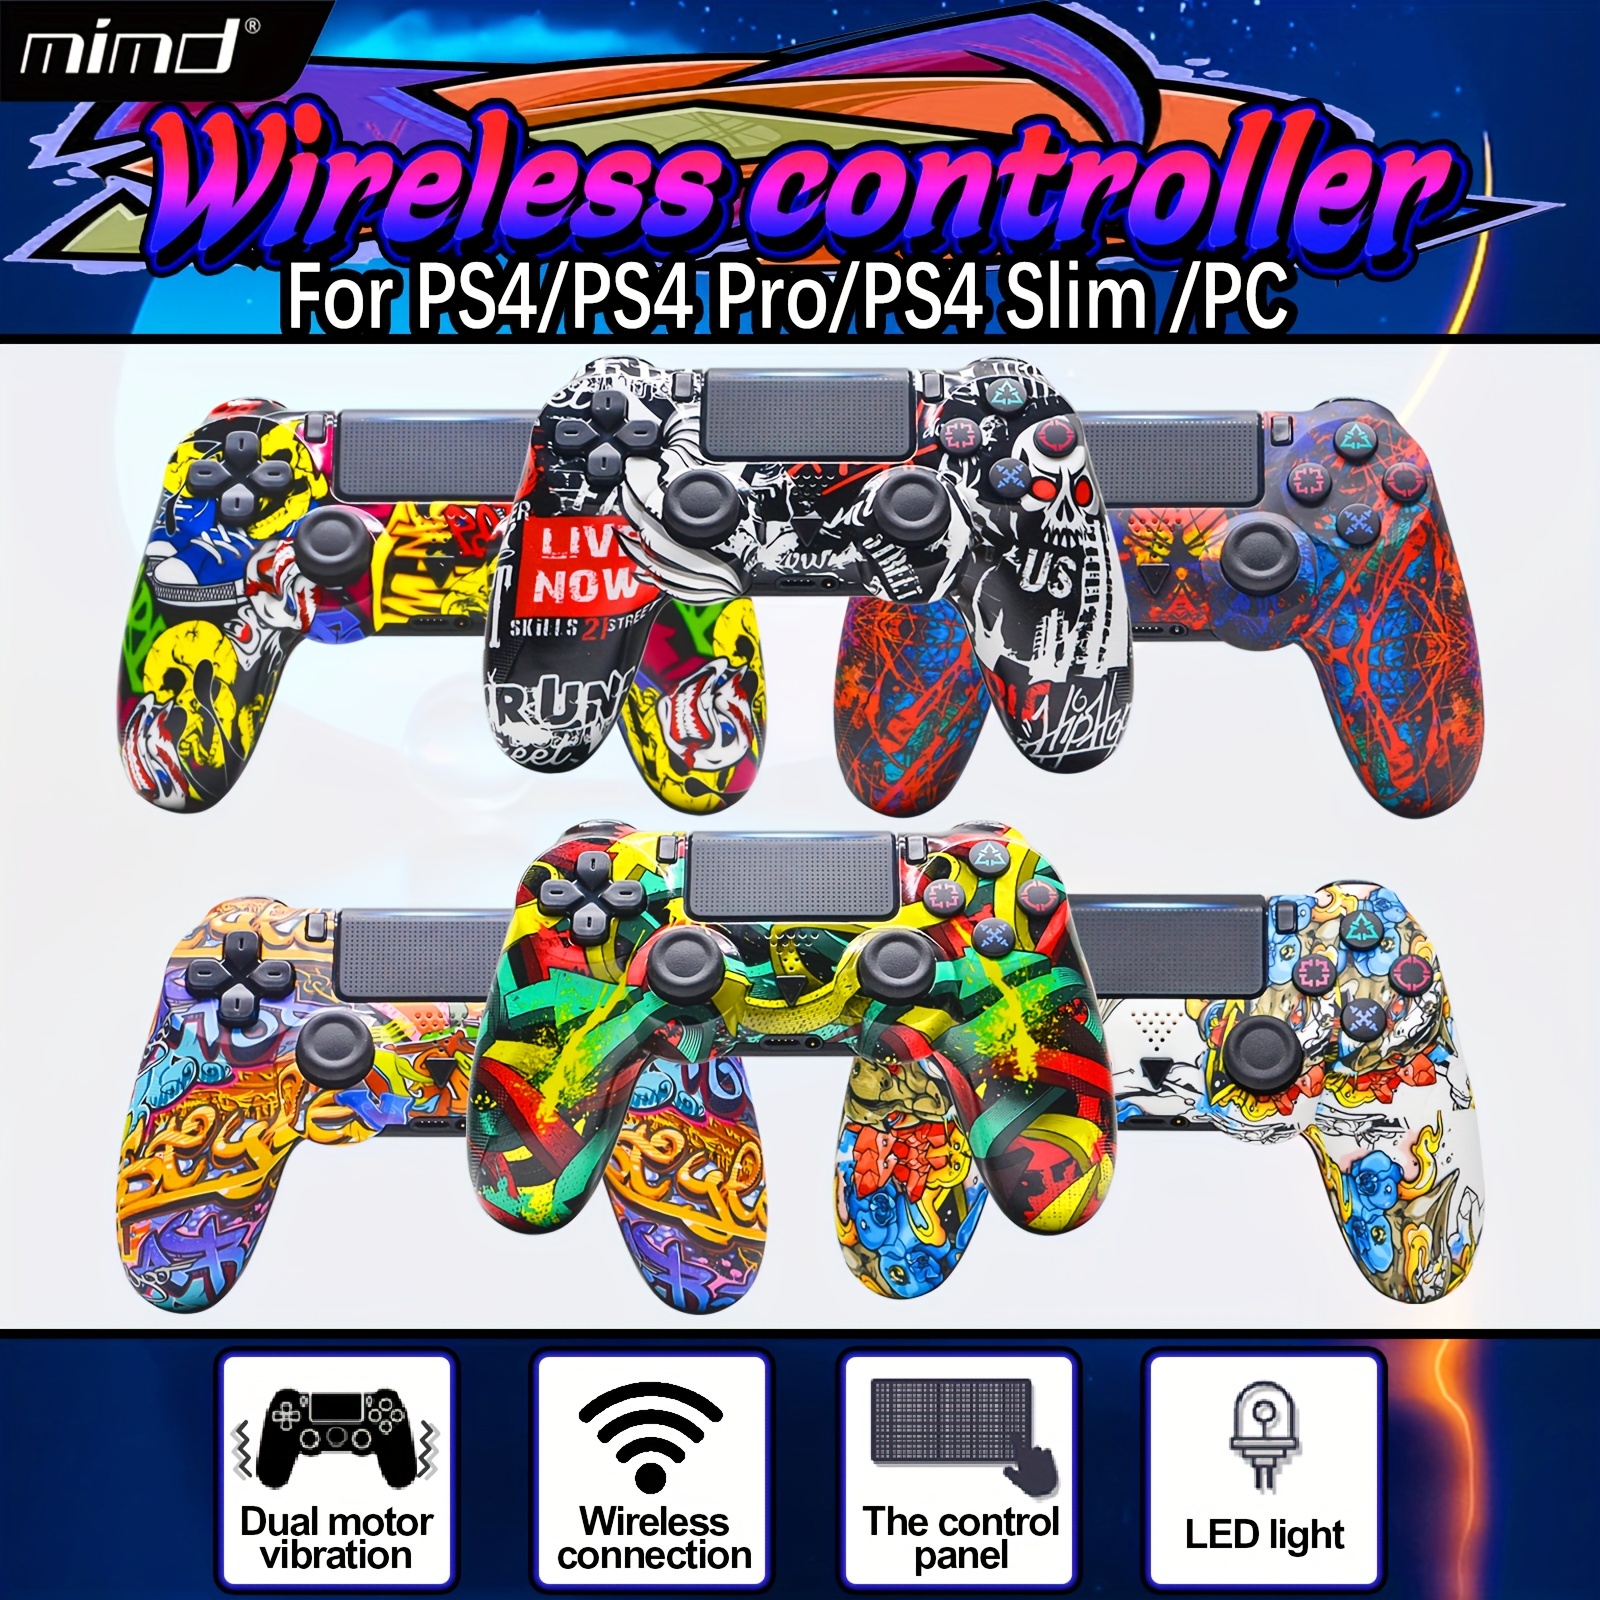 mimd wireless controller for ps4 compatible with ps4 slim pro gamepad with enhanceddual vibration analog sticks 6 axis motion sensor charging cable details 5